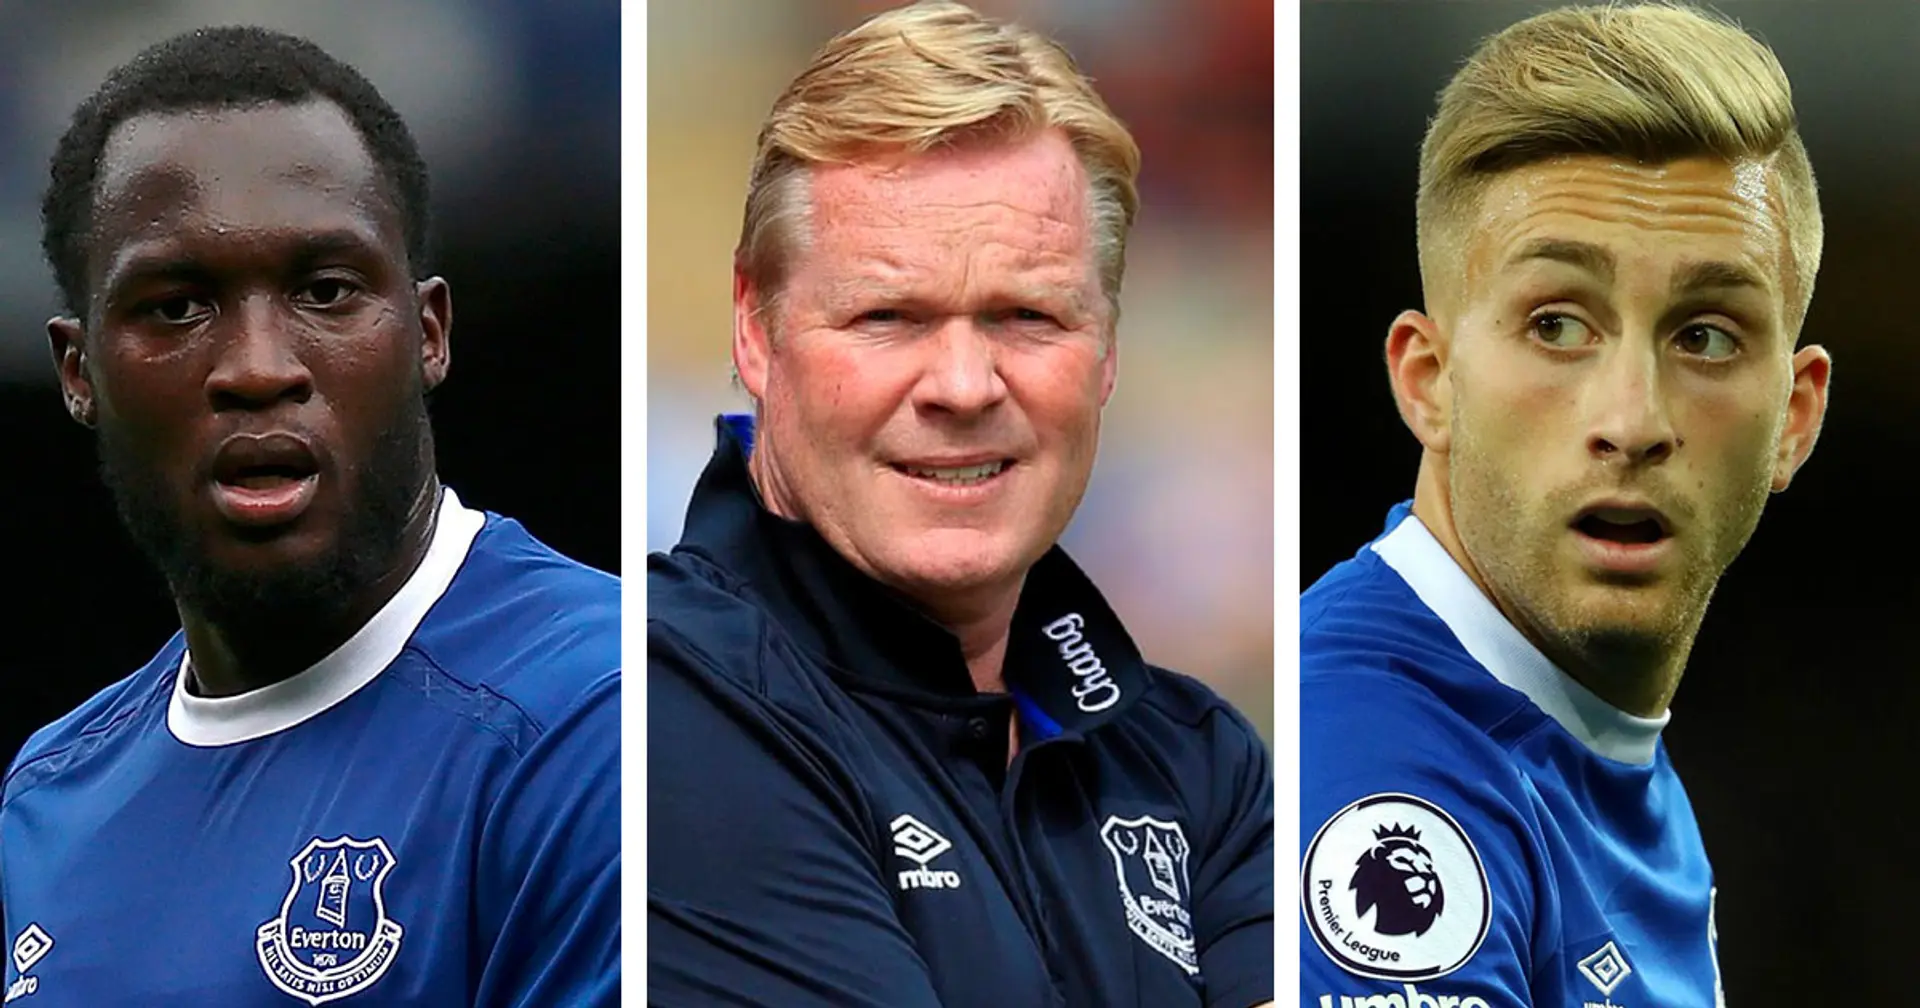 Sold! 4 moments from Koeman's managerial career that prove he loves selling players